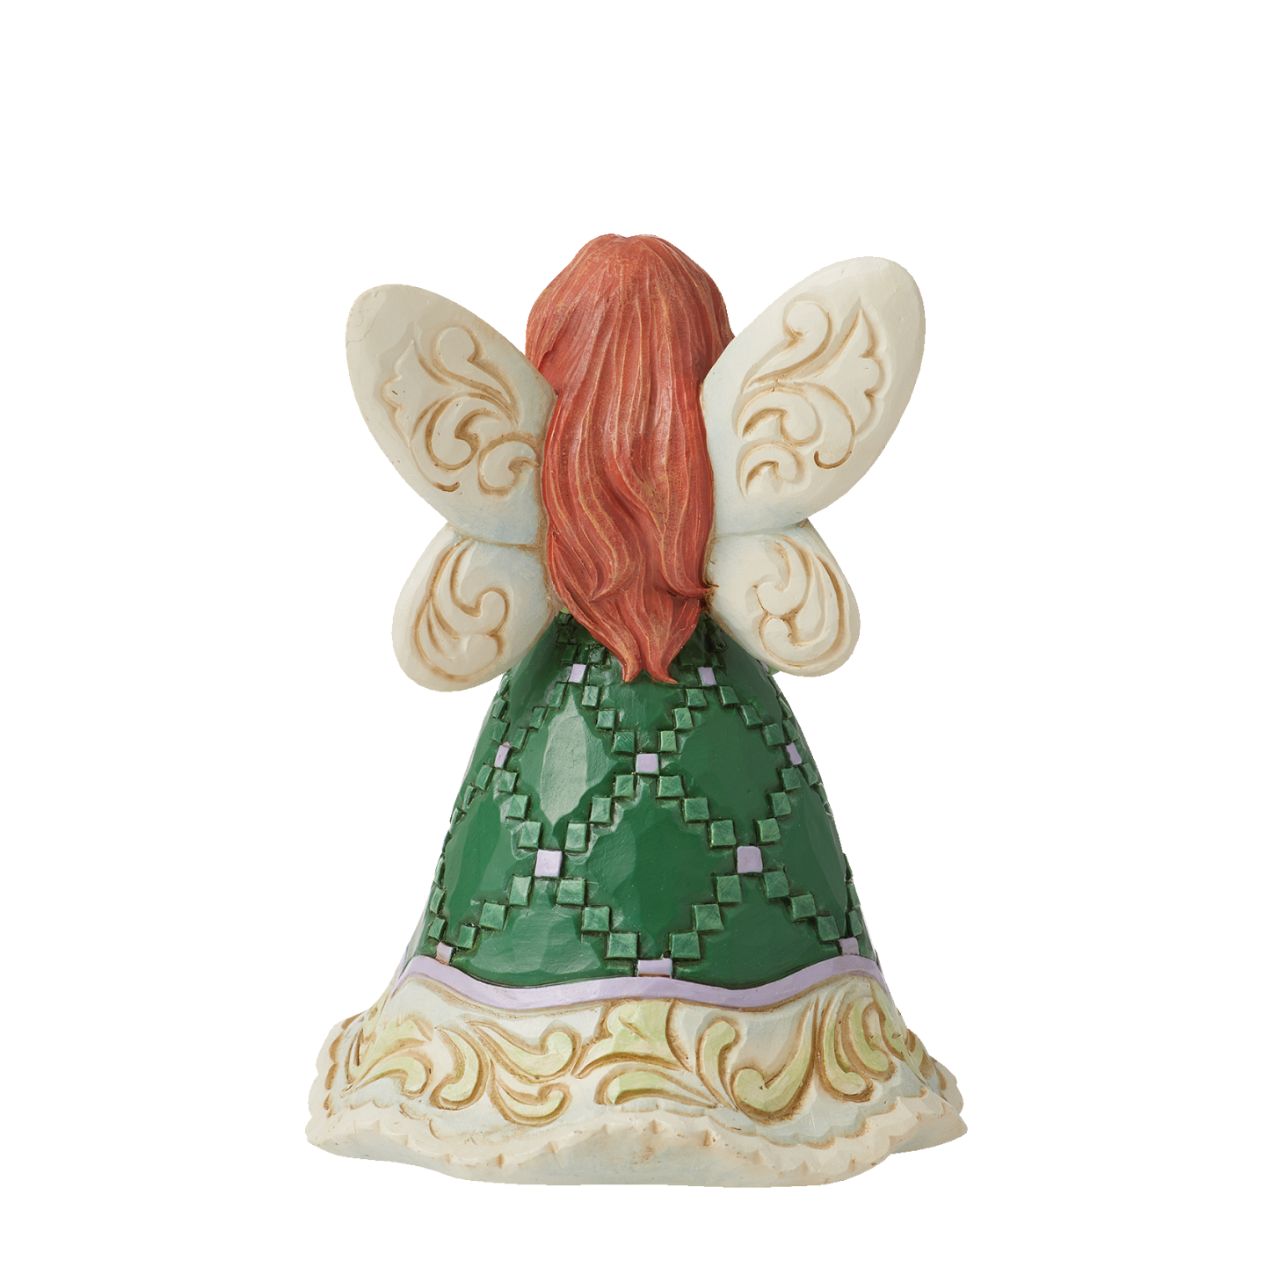 Irish Fairy Figurine by Jim Shore  This 4 fairy by Jim Shore is a bonny beauty clad in green and purple patterning with rosemaleed wings.